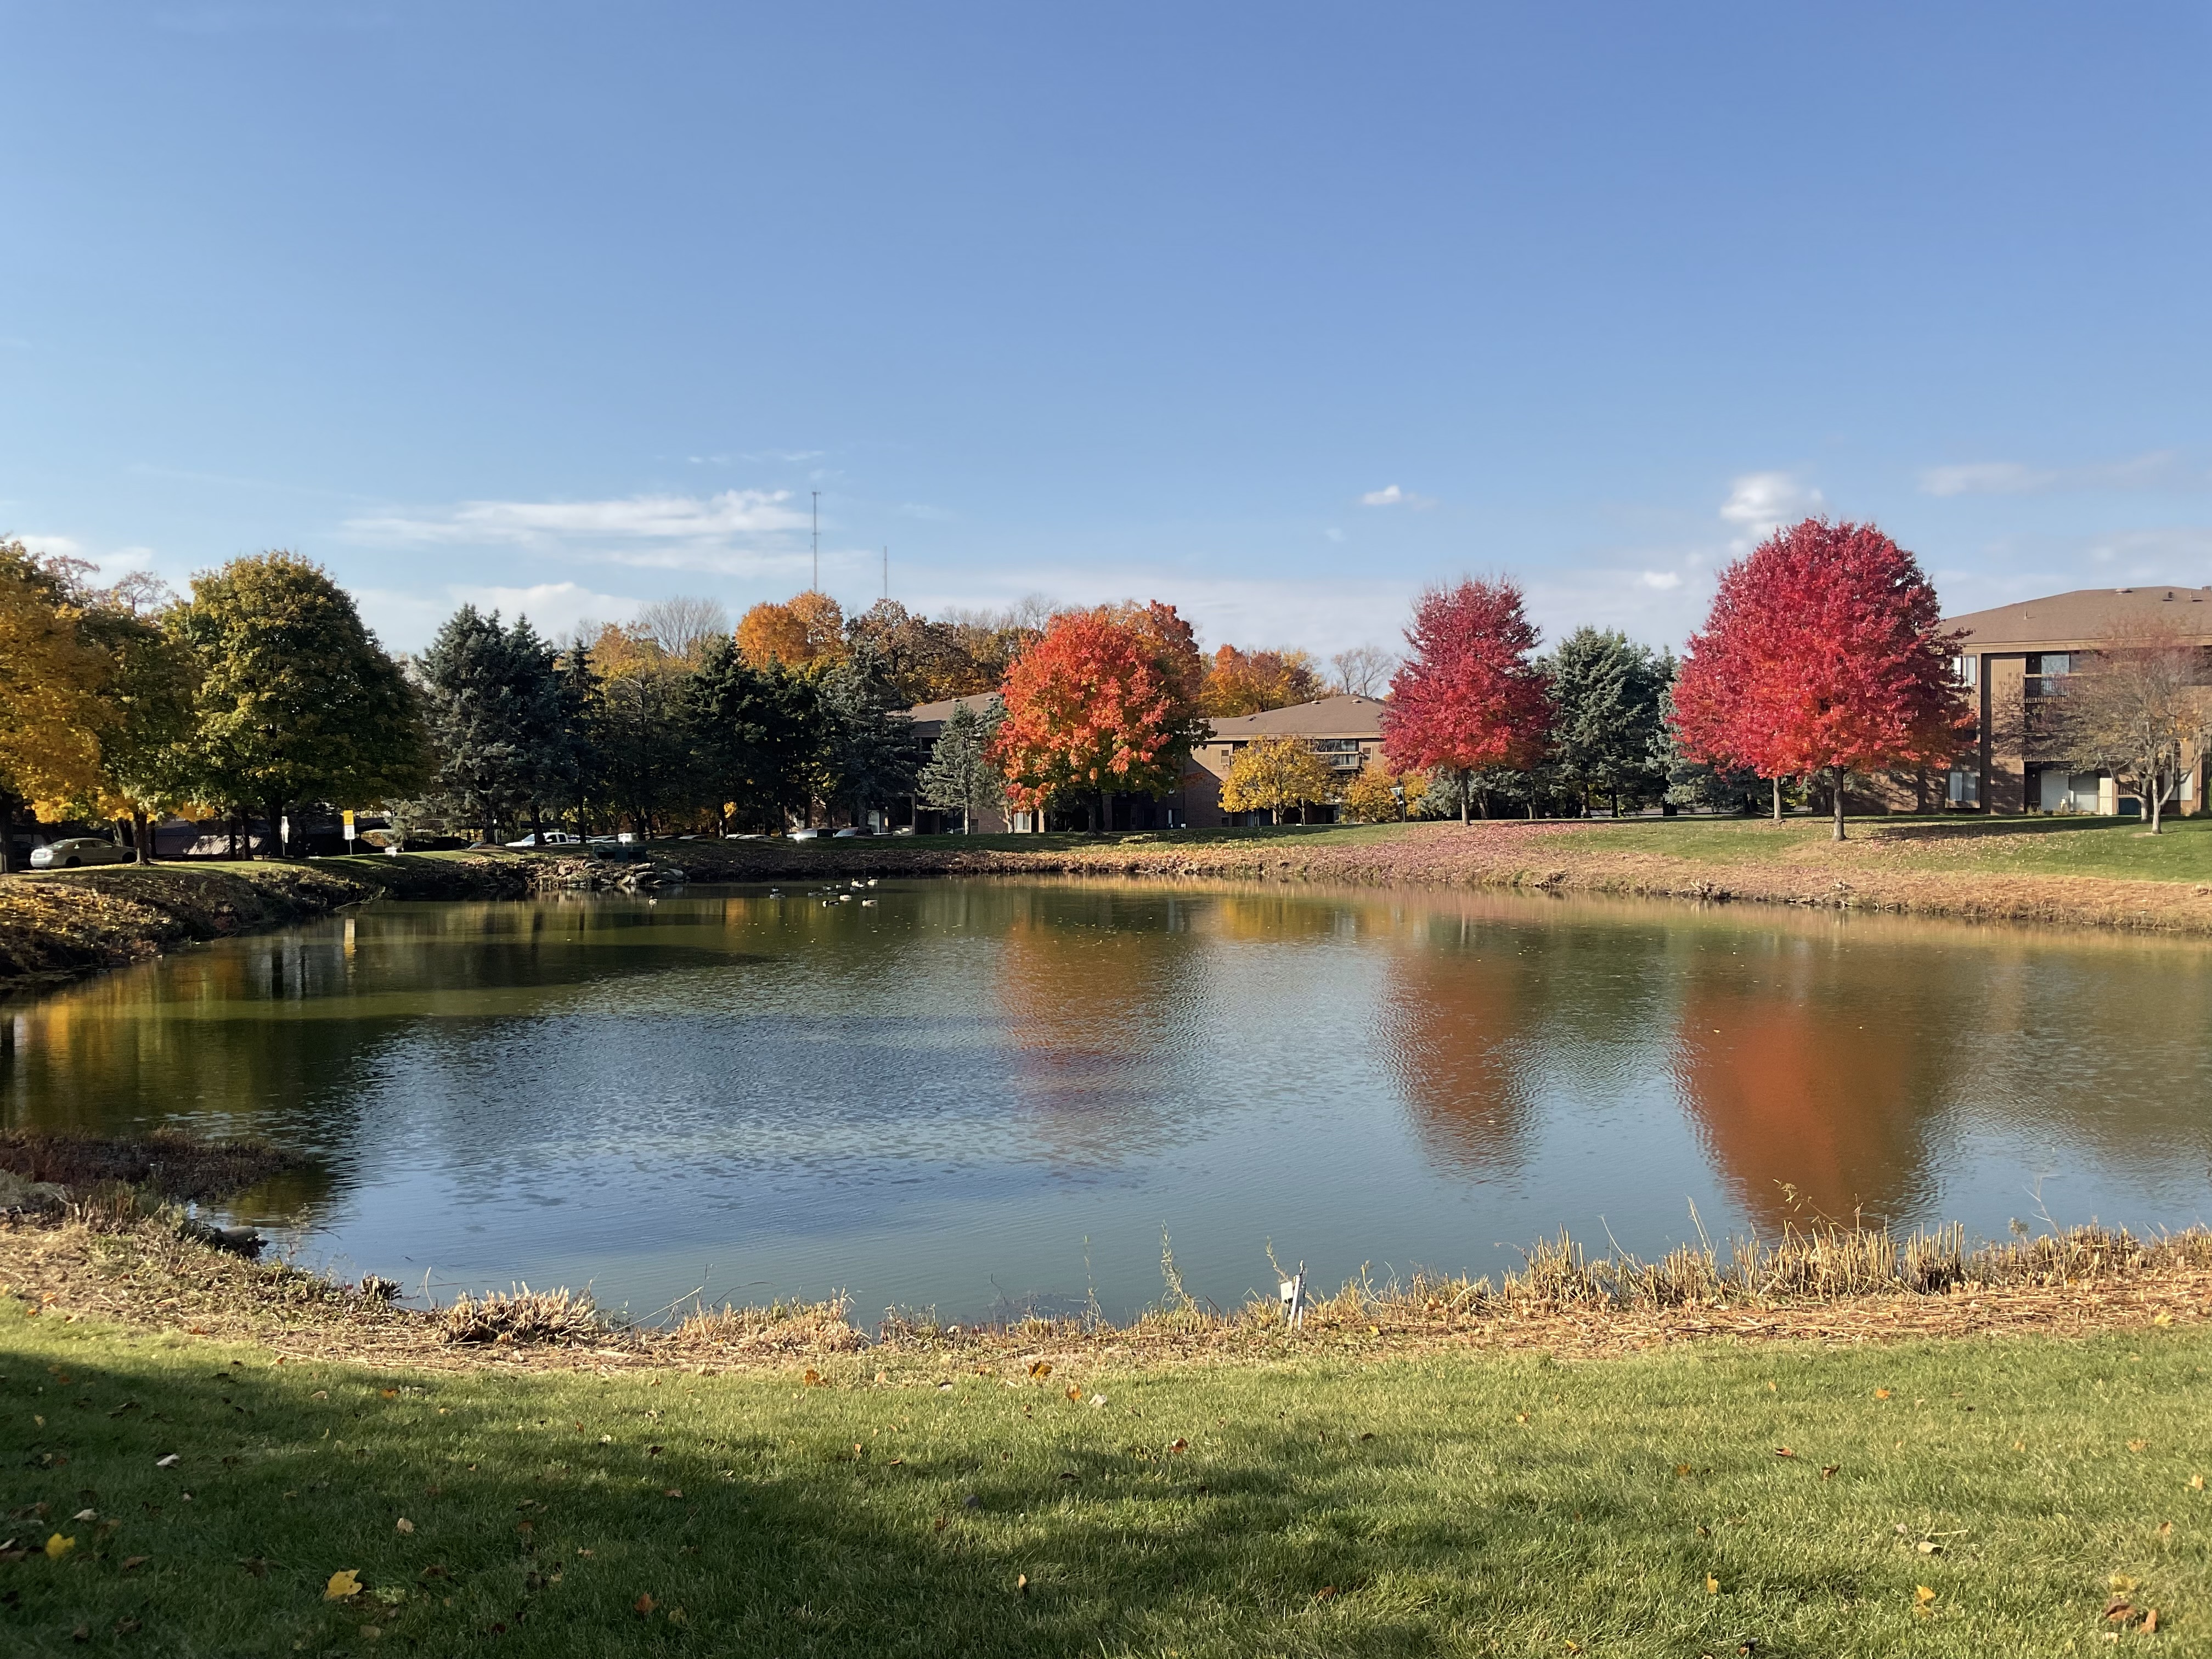 A photo of a small pond and trees with fall-colored leaves, taken with the iPad (2022).